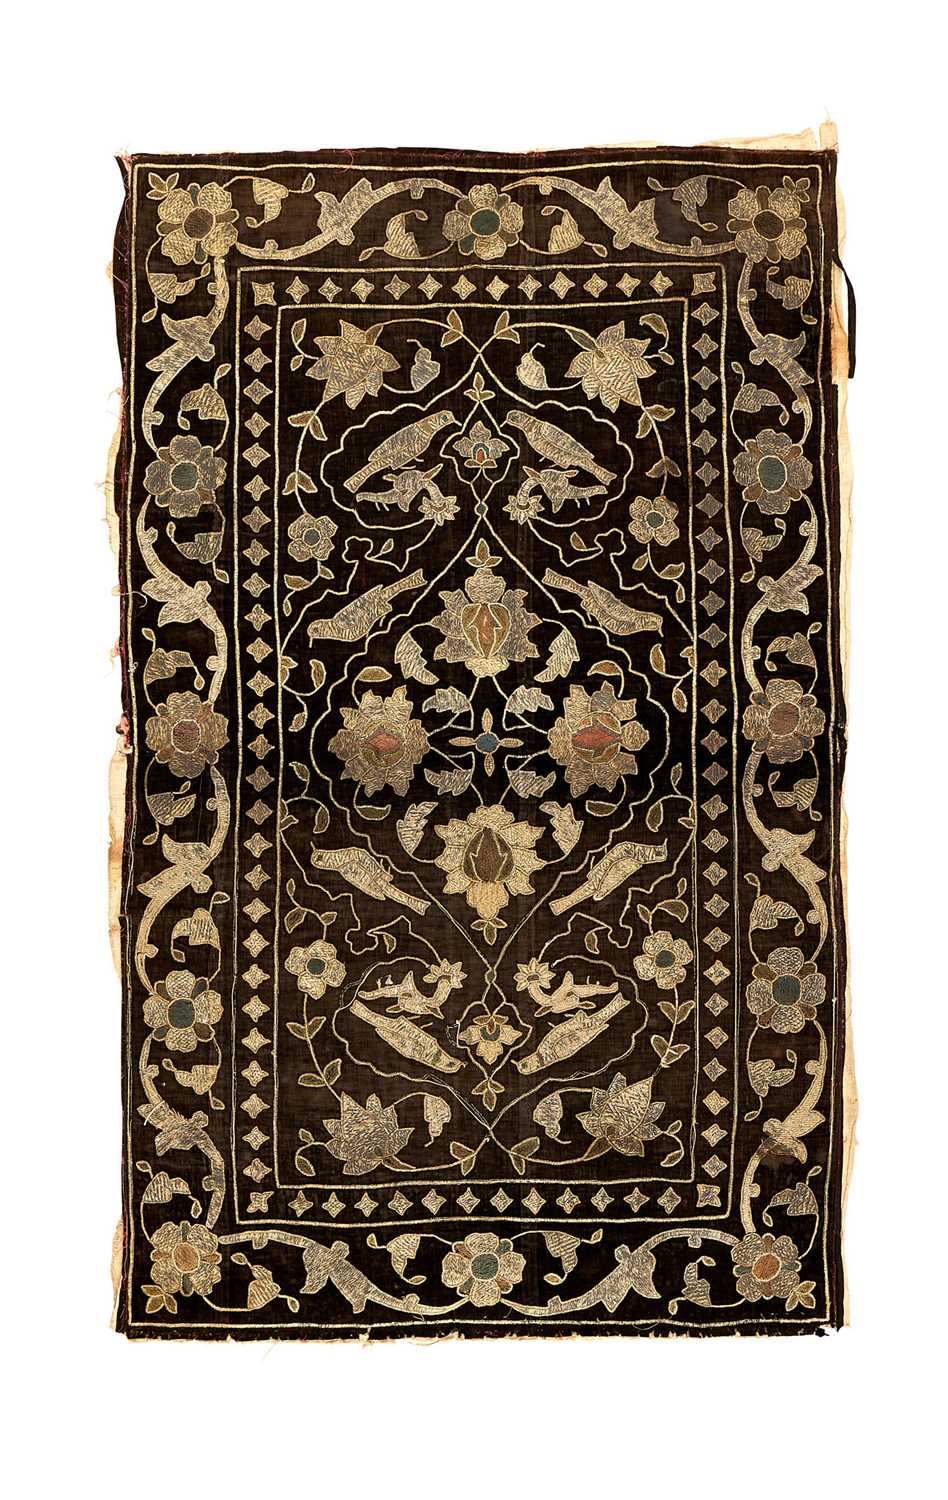 AN EARLY 19TH CENTURY OTTOMAN VELVET AND METAL THREAD TEXTILE, PERSIAN